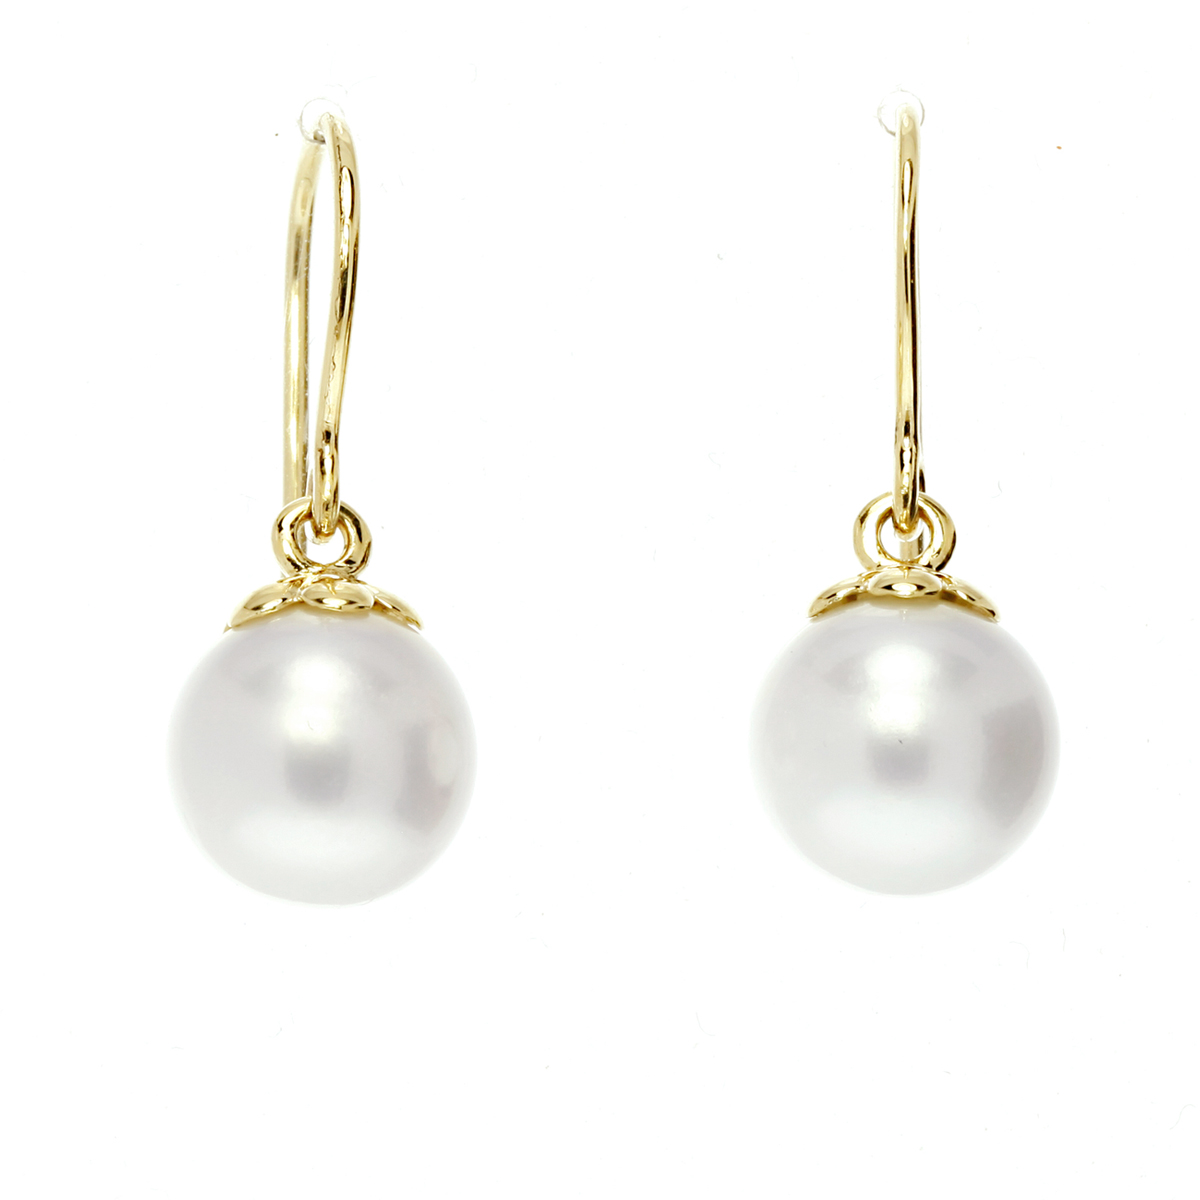 NFC Jewelry By Galatea: Momento Pearl Earrings For Iphone 7 and newer ...